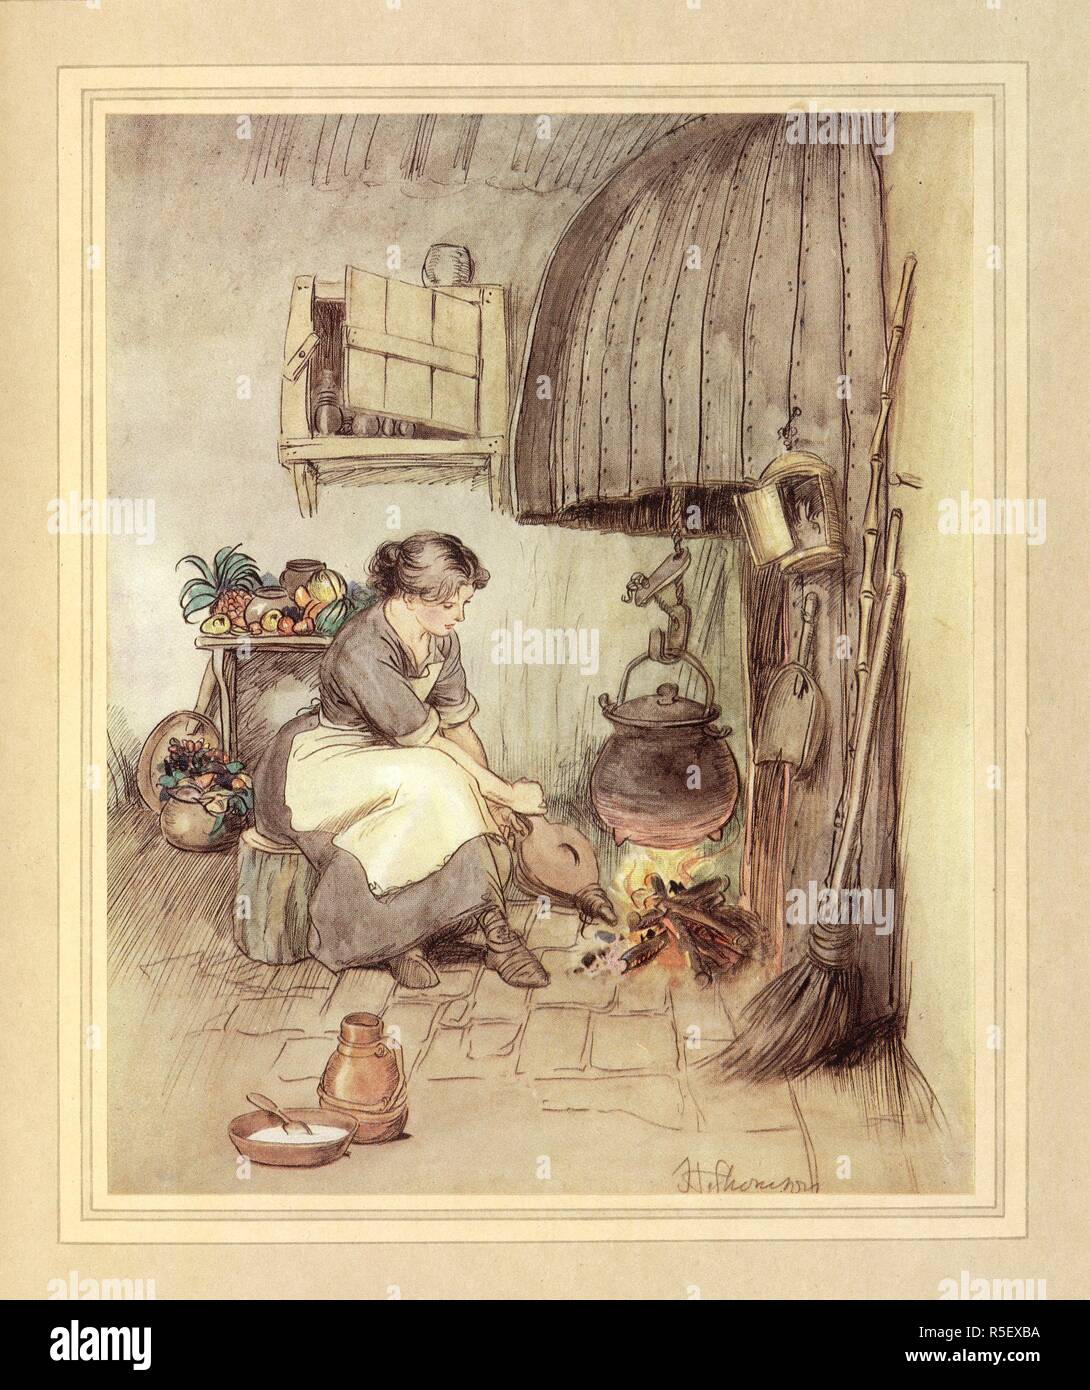 A young woman making a fire. The Admirable Crichton ... Illustrated by Hugh Thomson. Hodder & Stoughton: London, [1914.]. Source: K.T.C.102.b.3, page 136. Language: English. Stock Photo